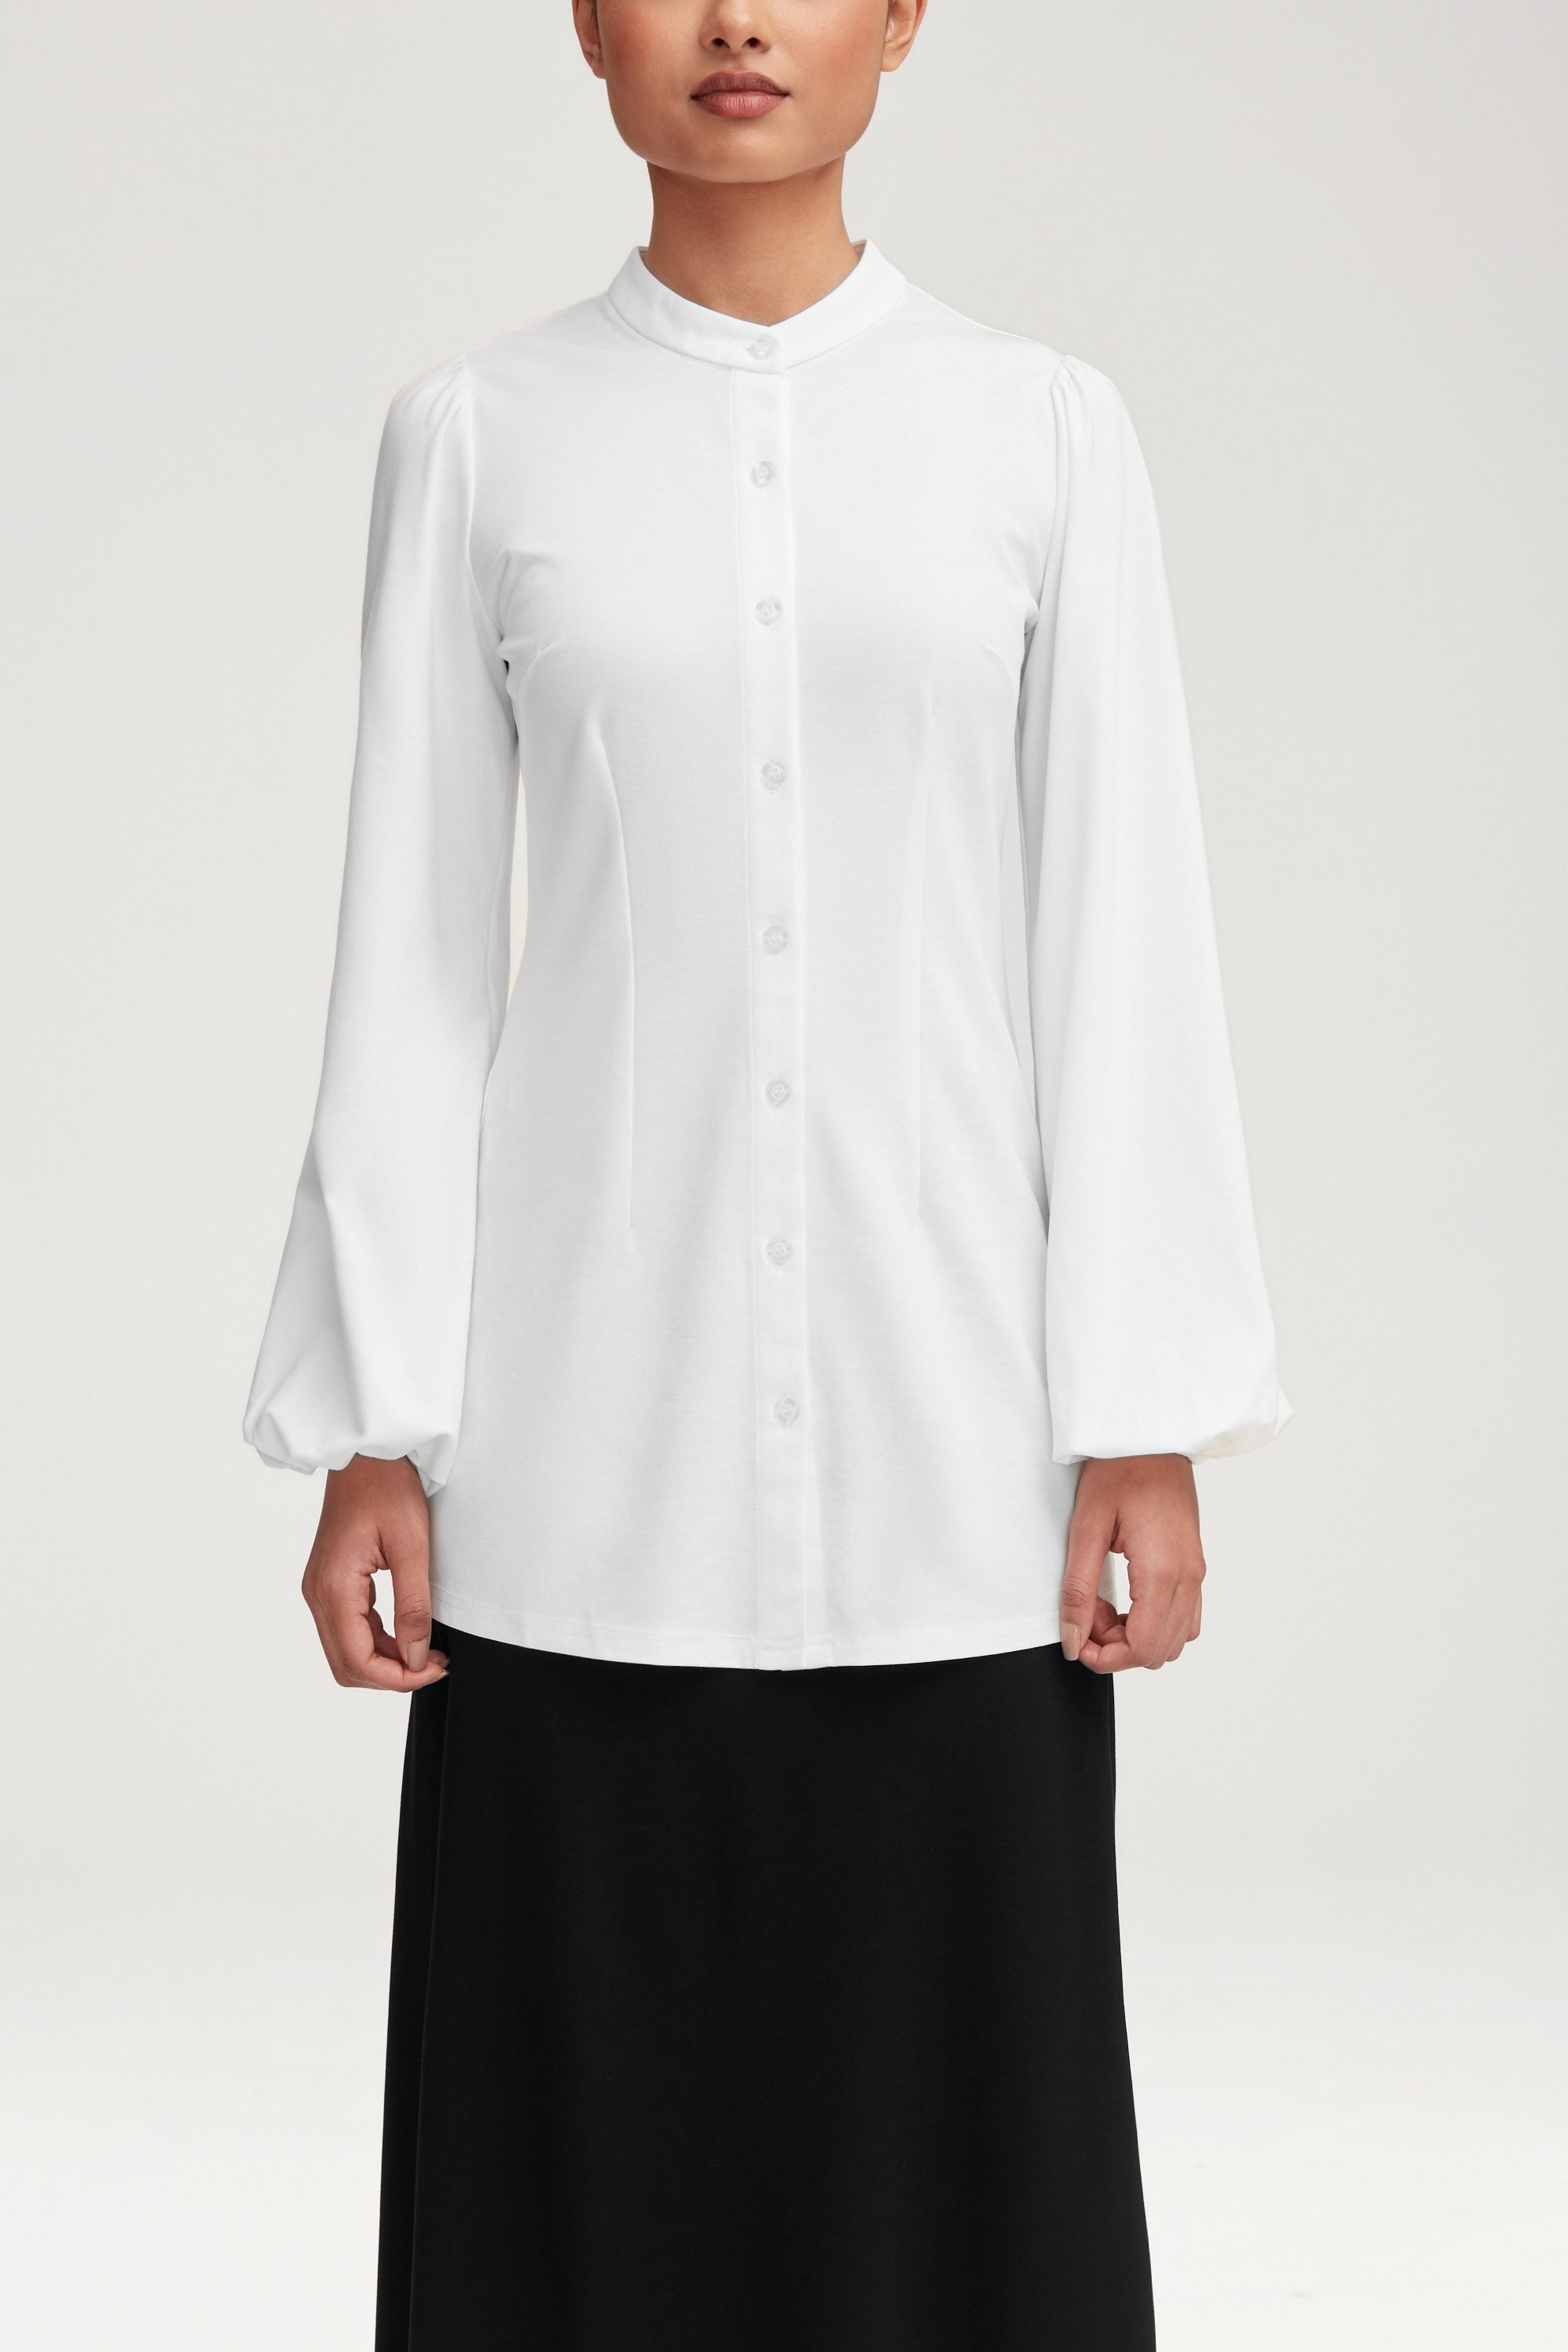 Rayana Jersey Button Down Top - White Clothing epschoolboard 